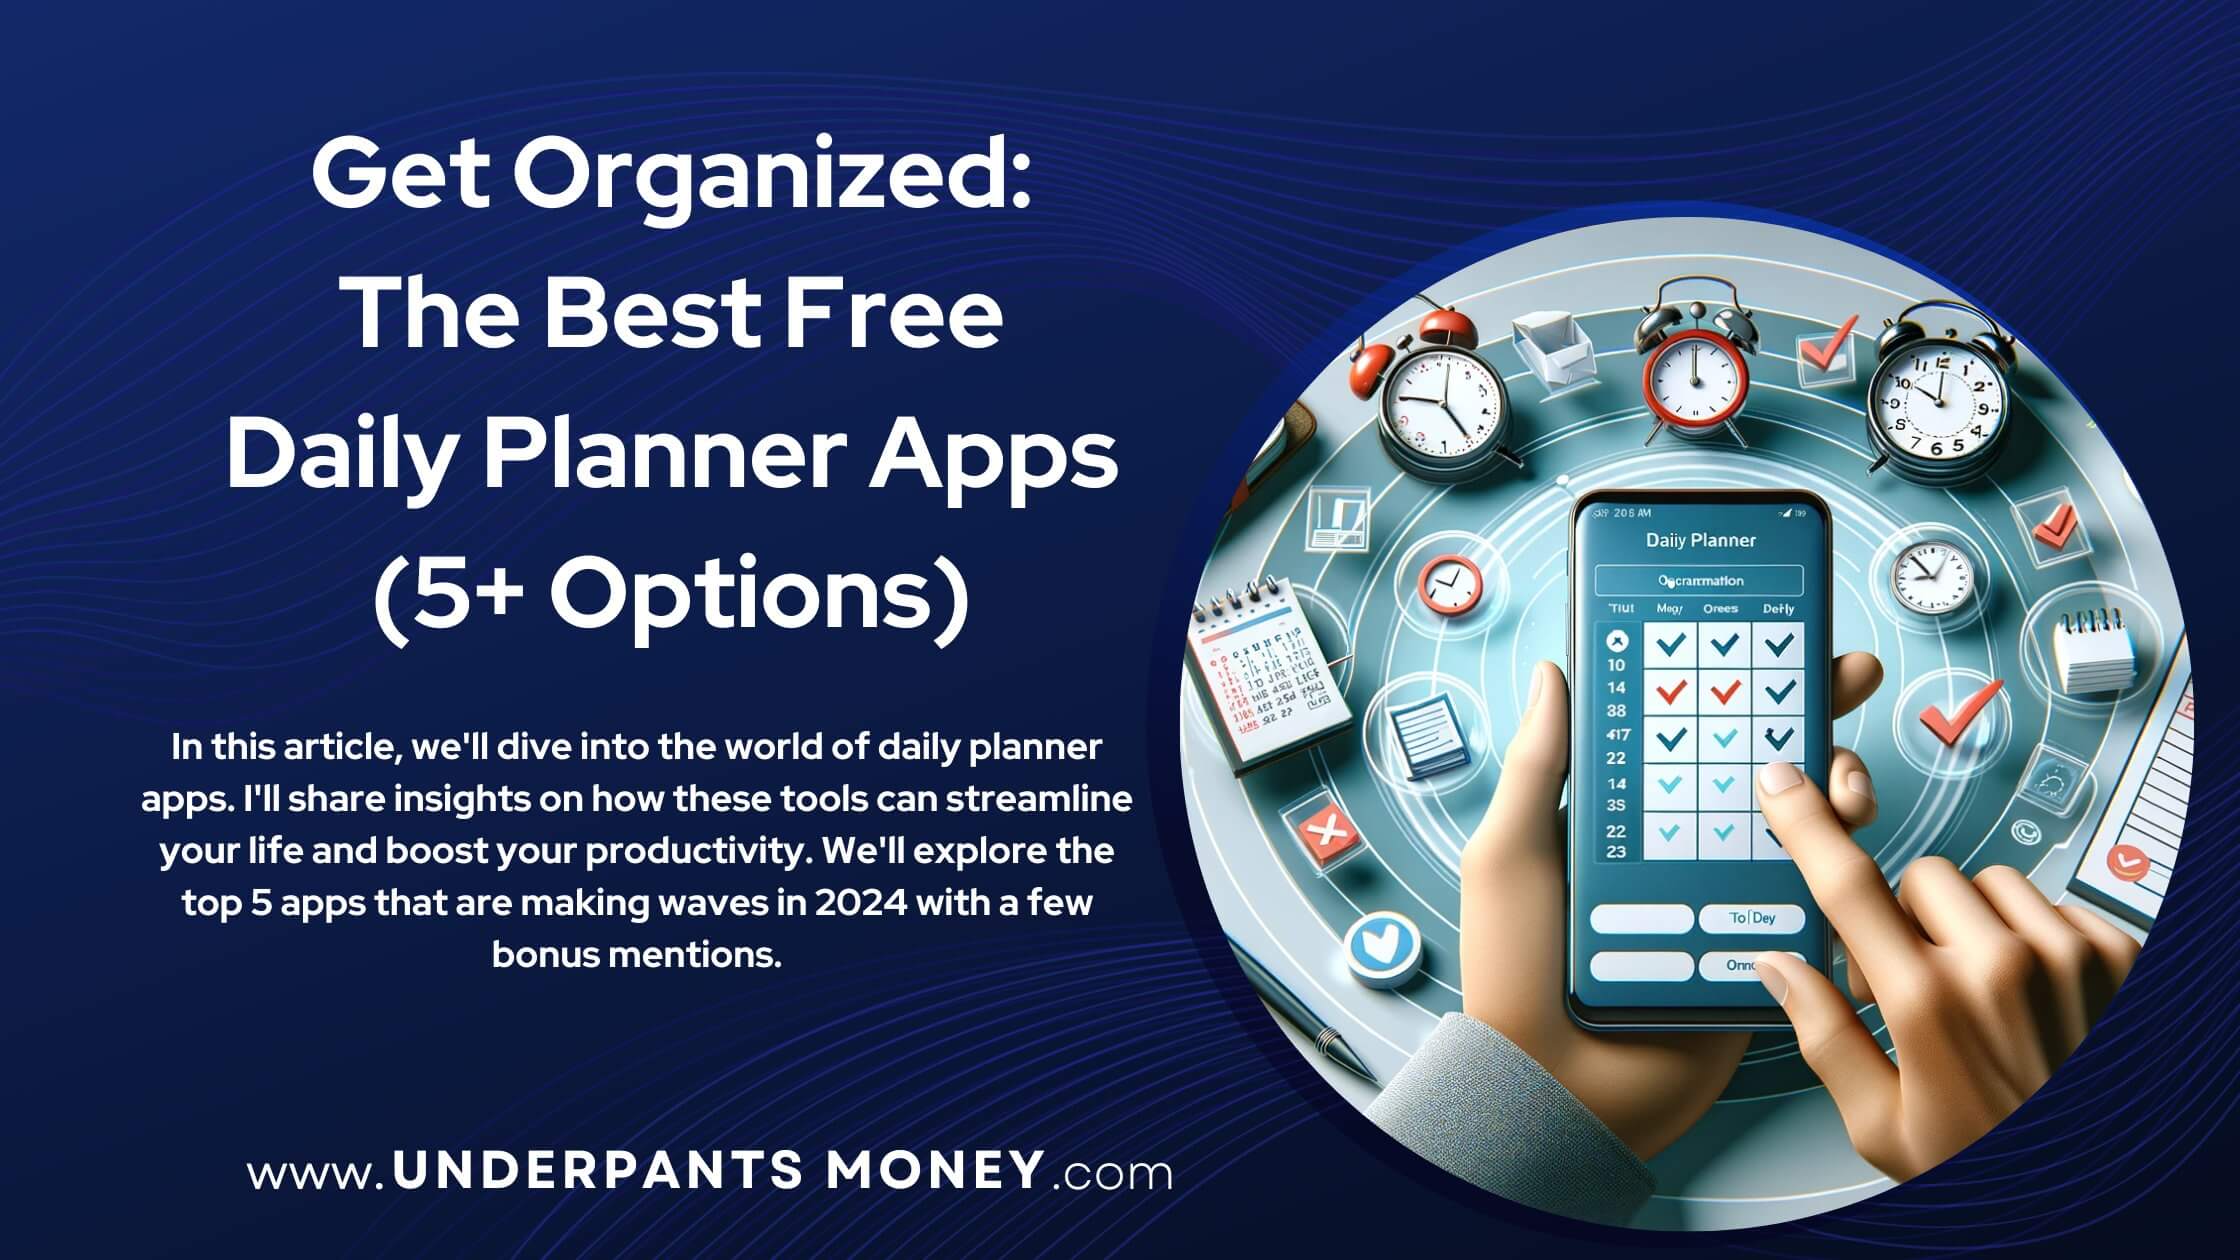 Best Free Daily Planner Apps title with description on blue. Hand hovering over phone completing tasks to right of text